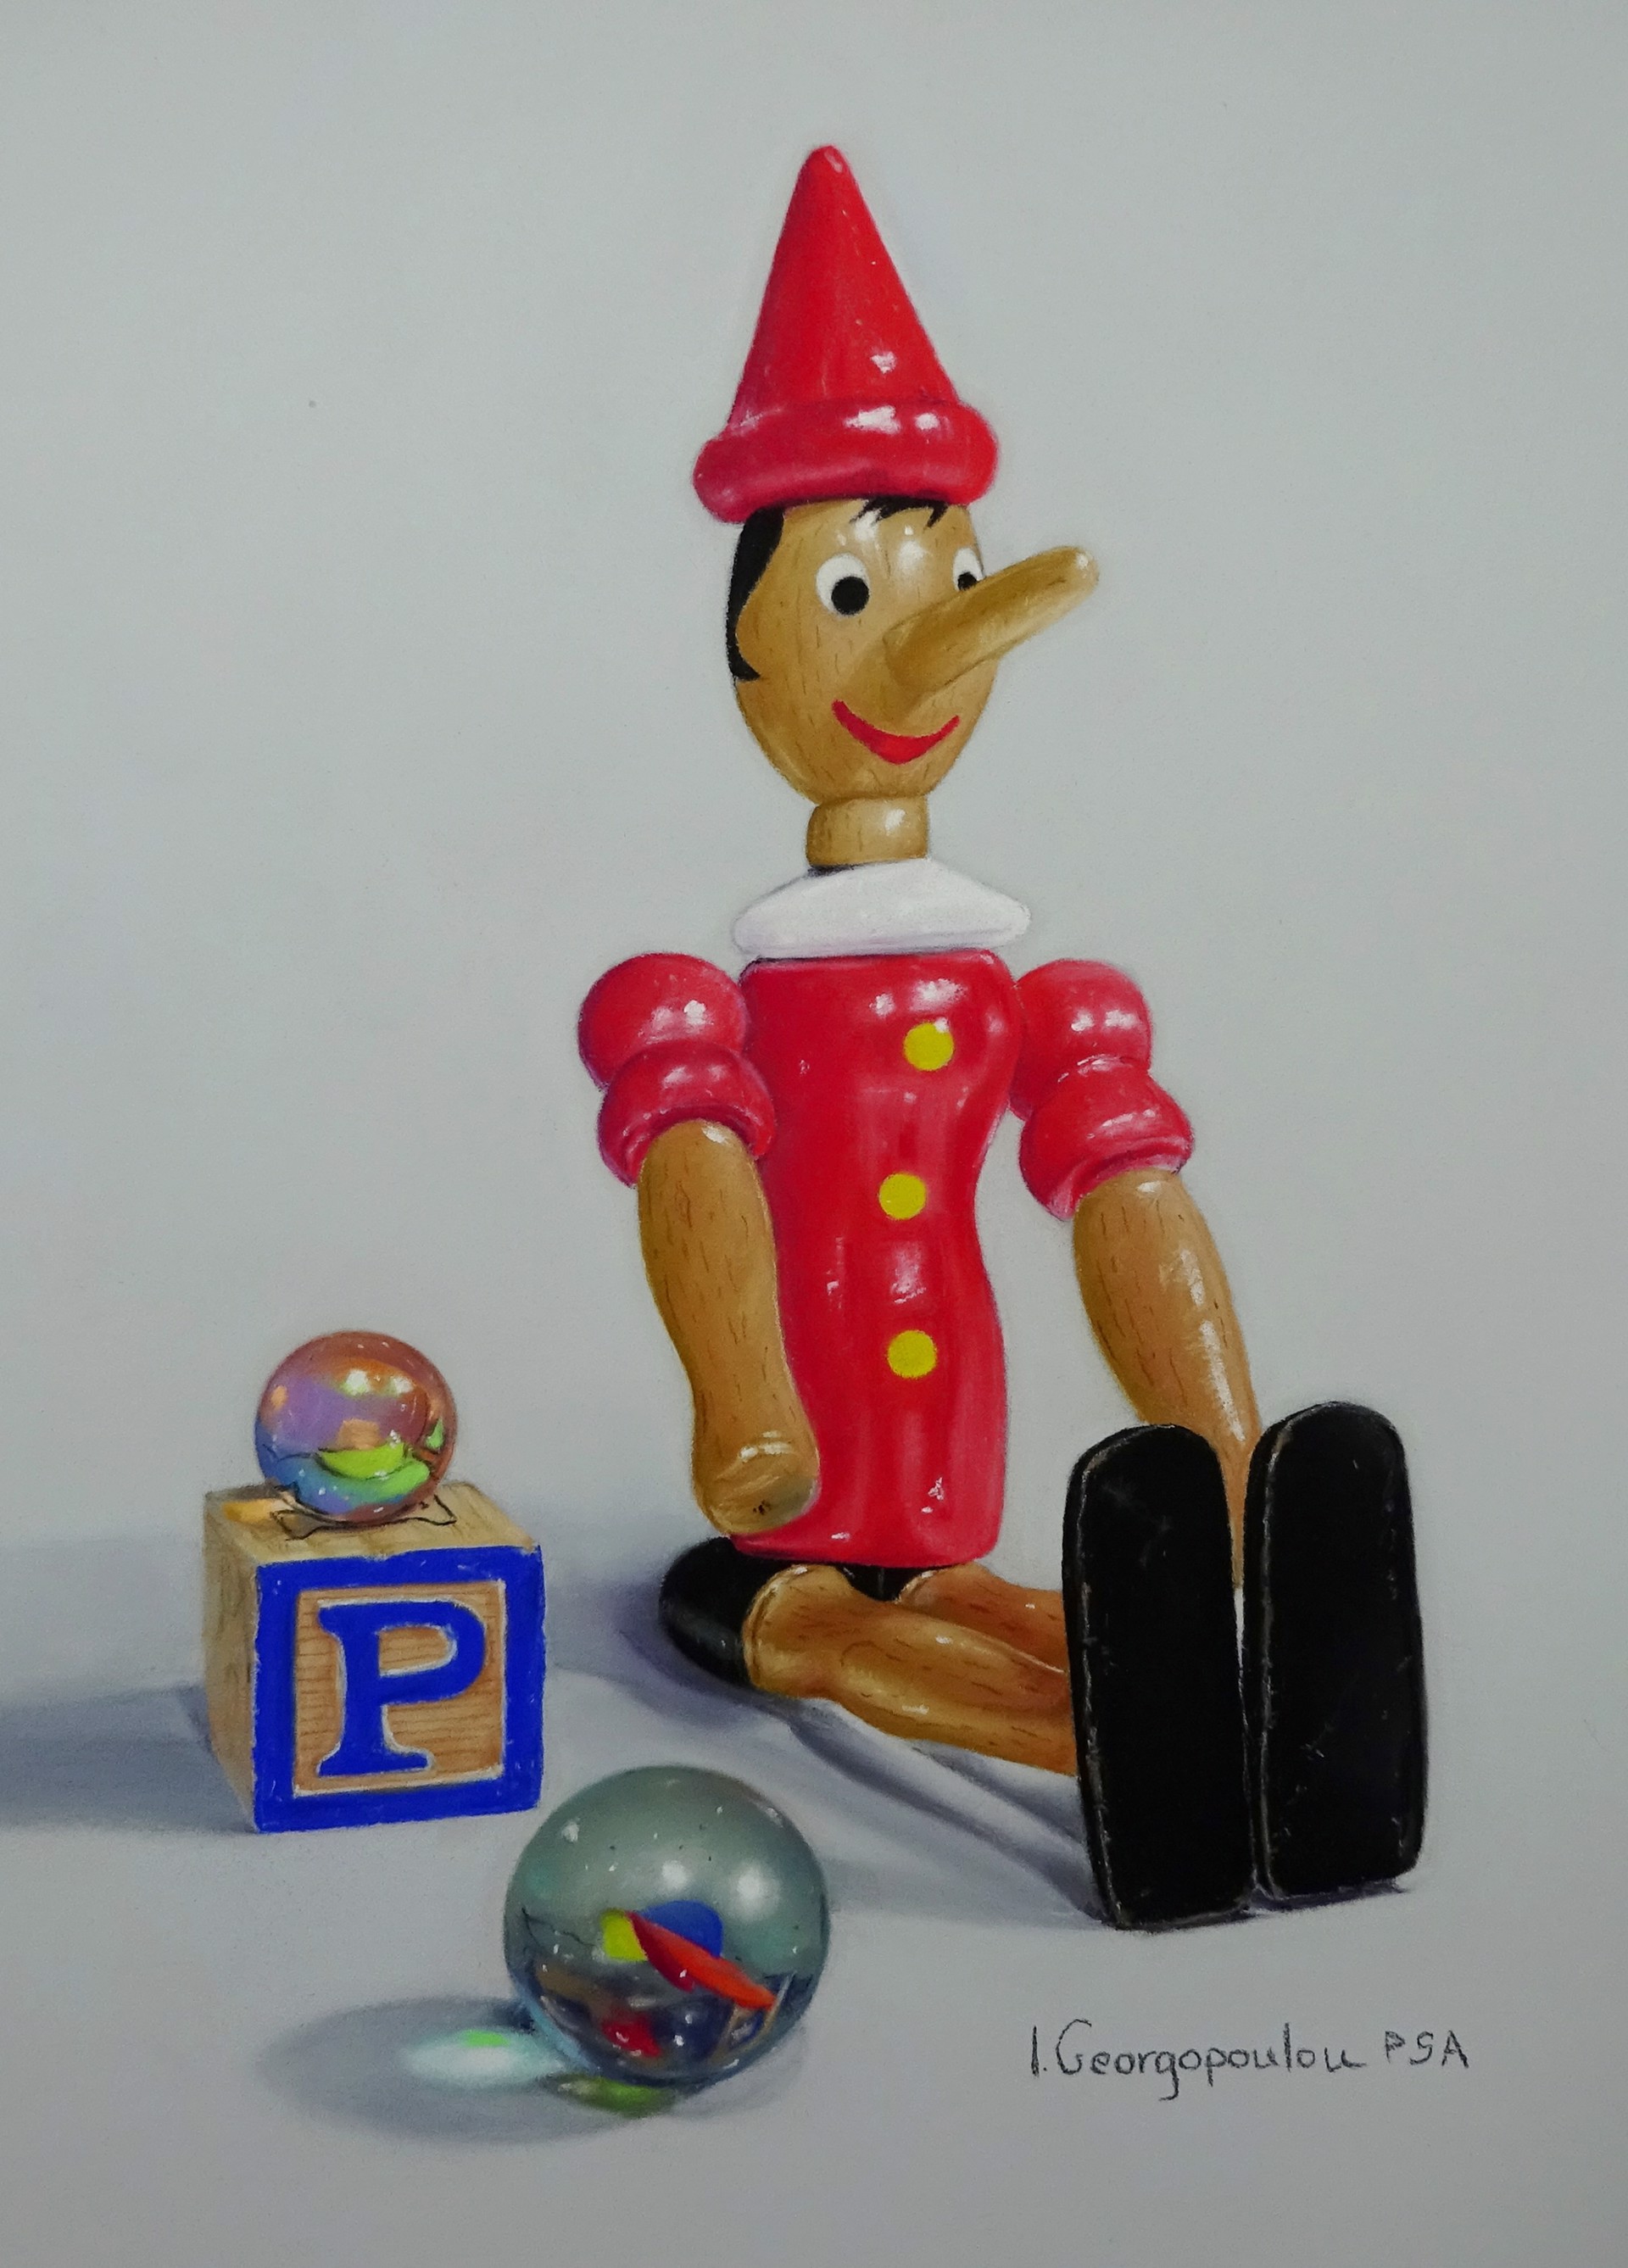 P is for Pinocchio by Irene Georgopoulou